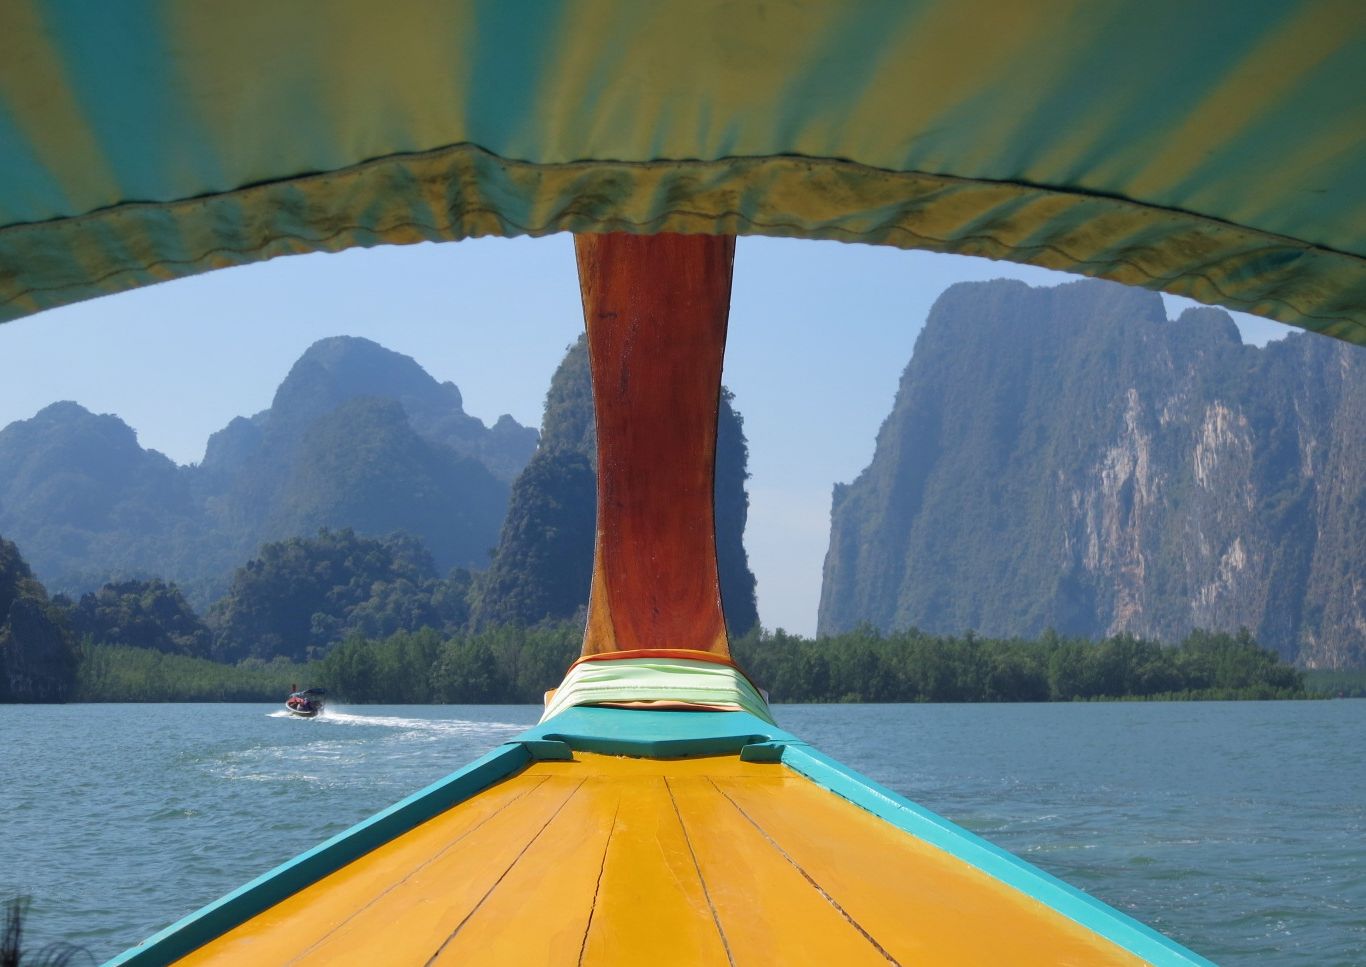 Longtail boat on Chiew Larn Lake in karst scenery